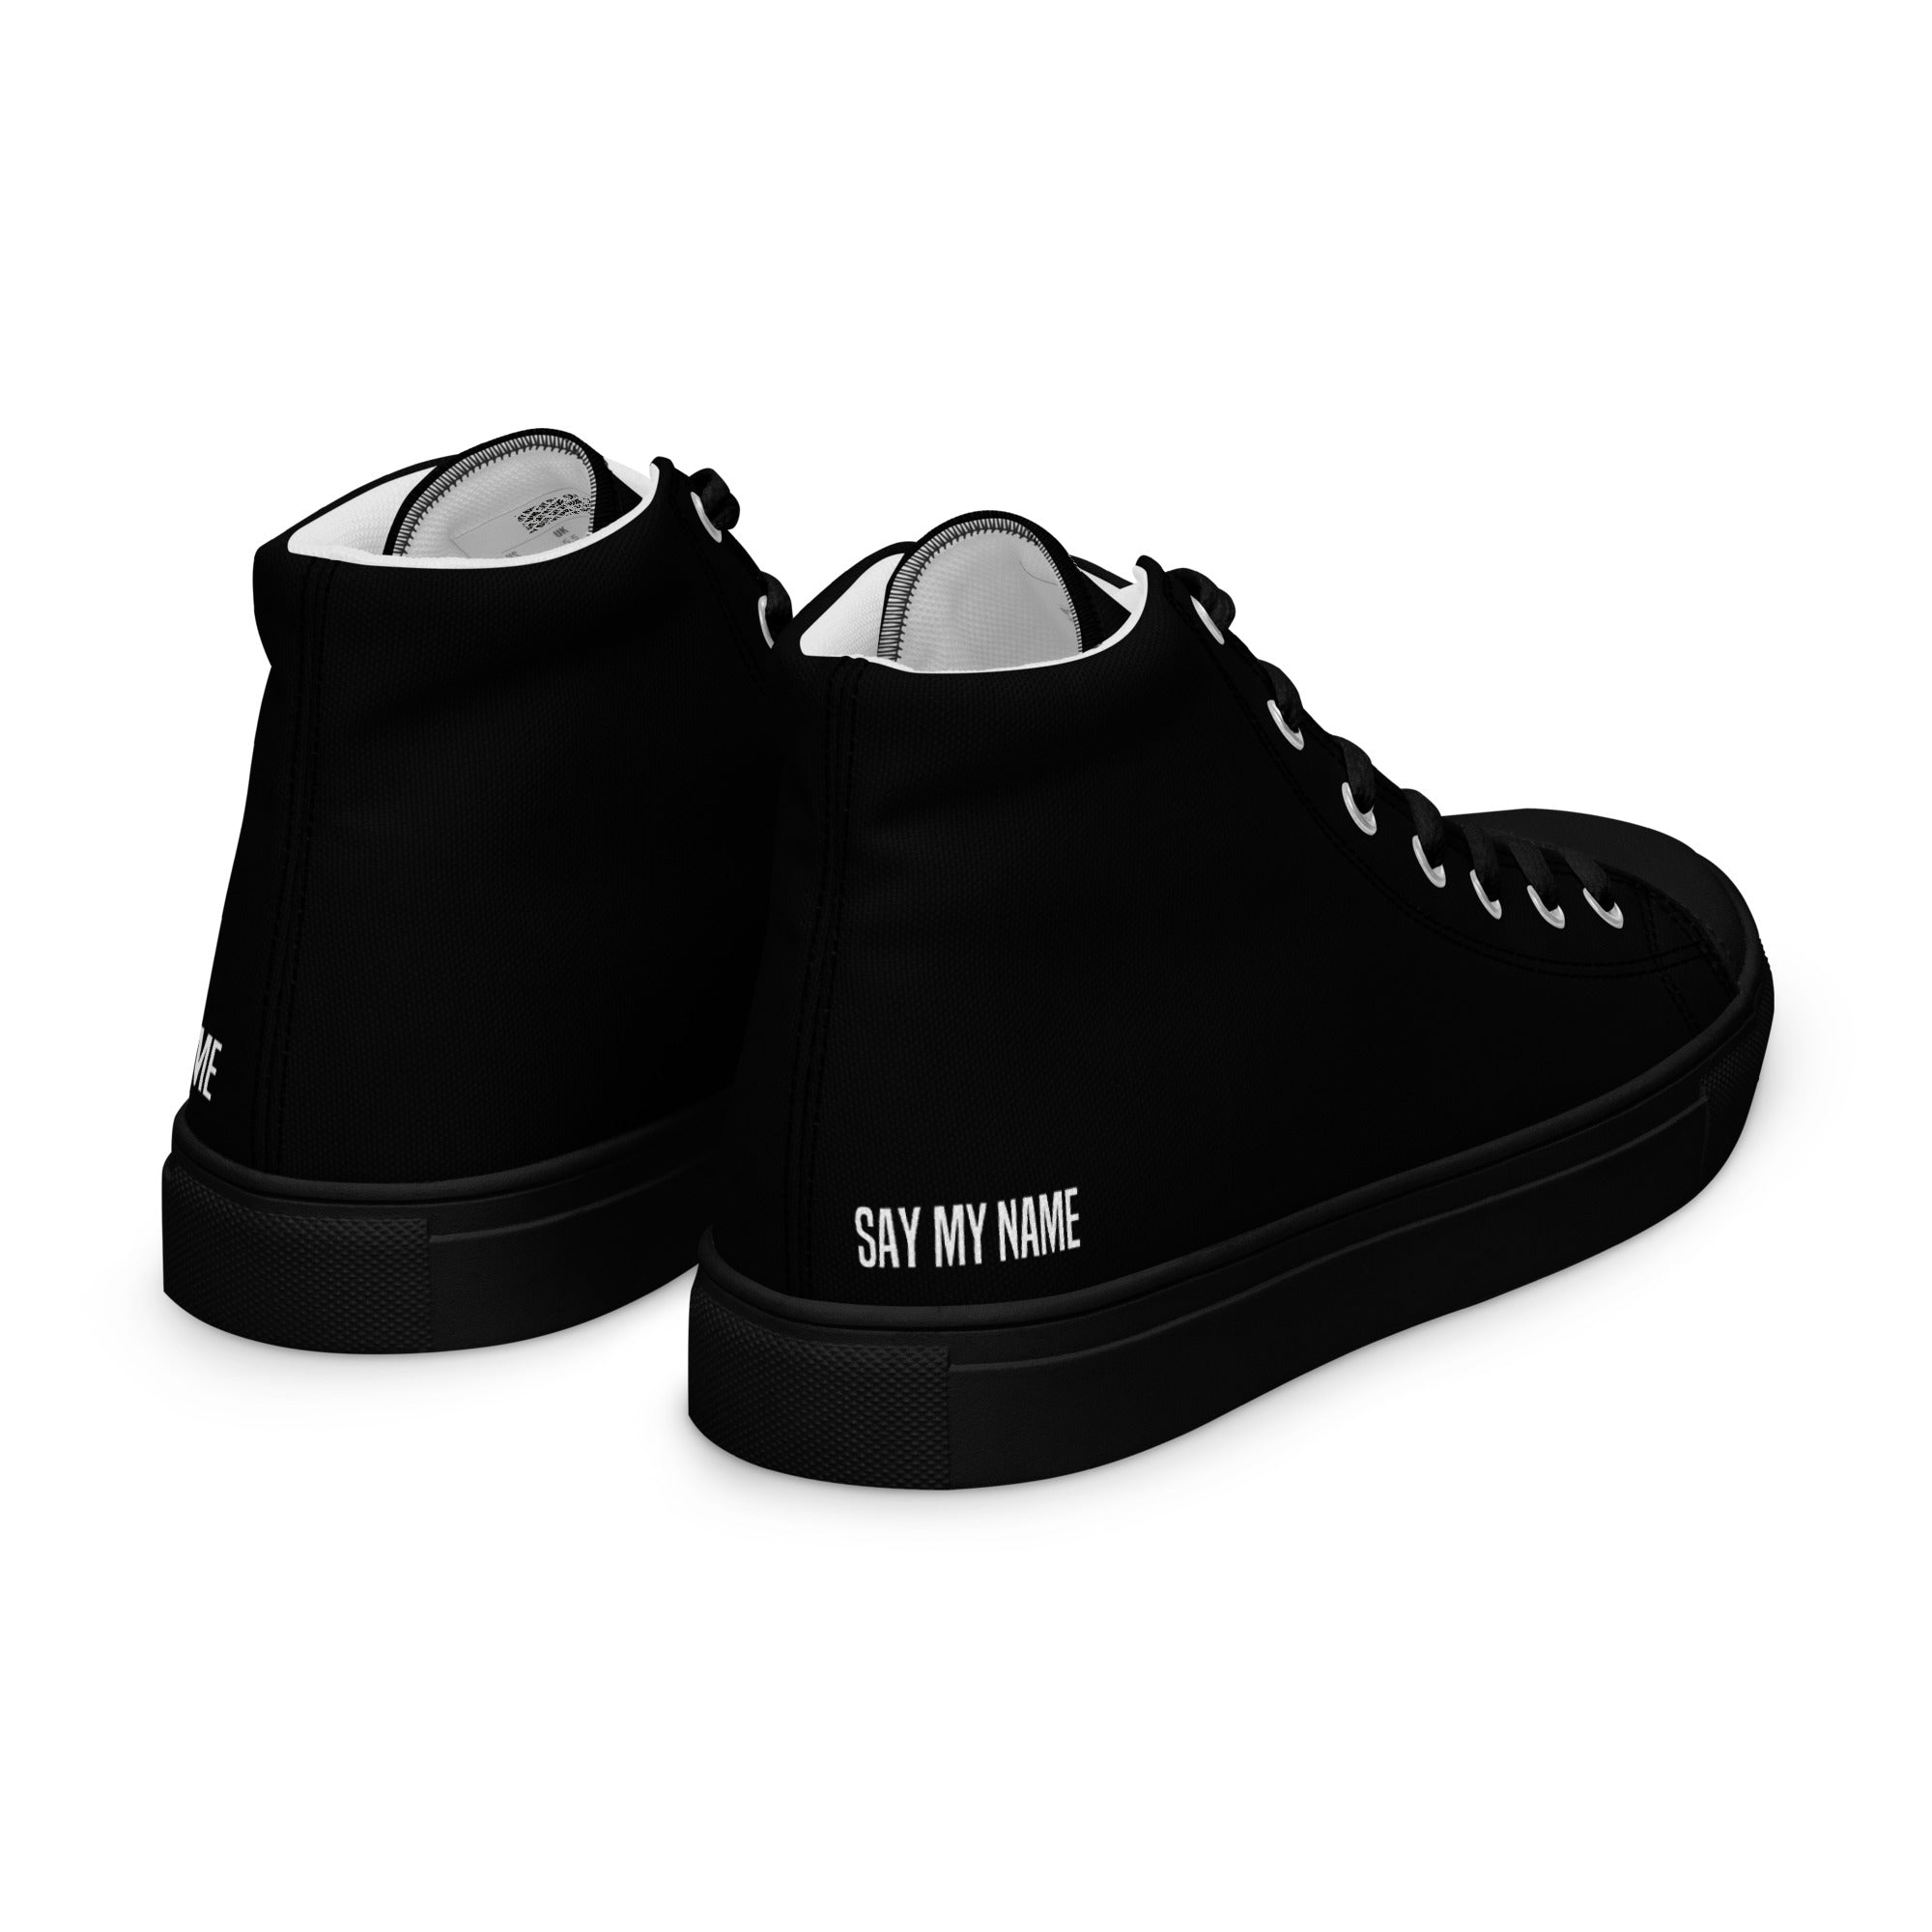 BLACK BLACK "SAY MY NAME" women's high canvas sneakers